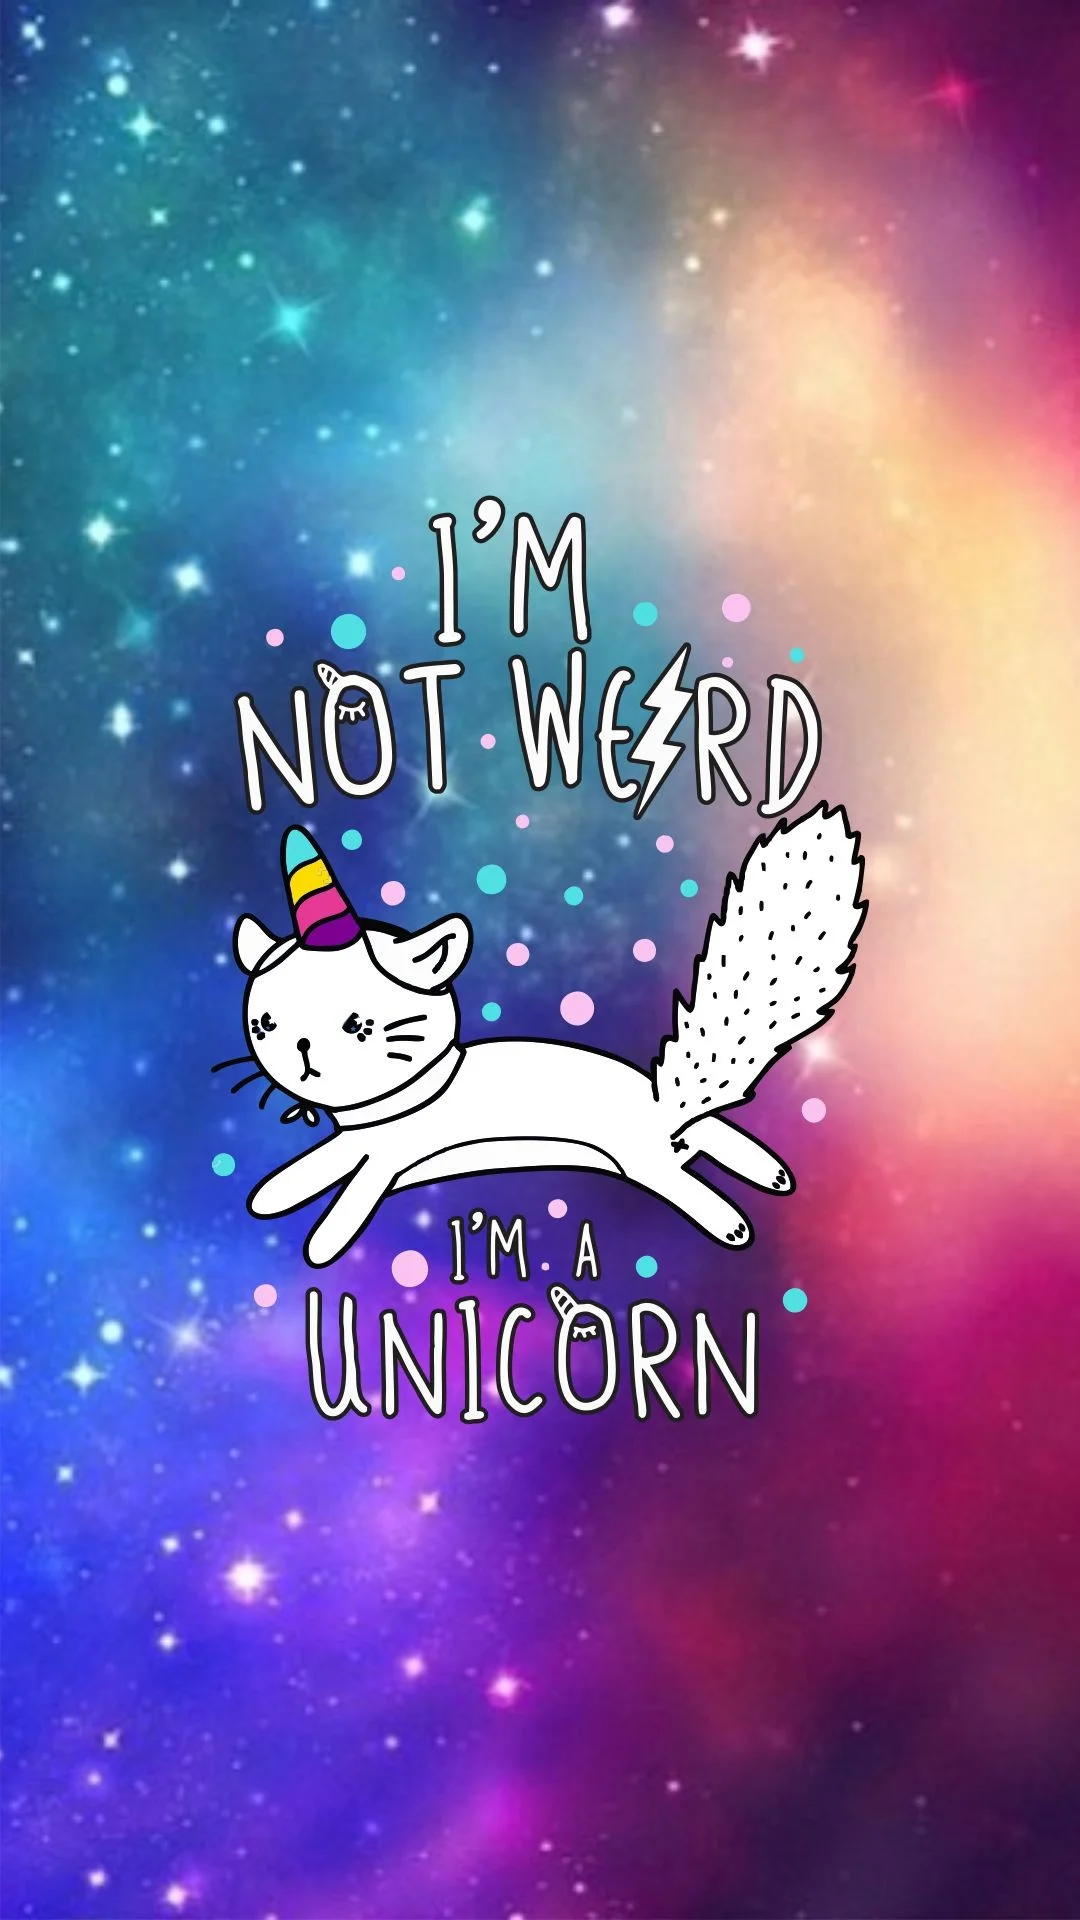 Unicorn HD Wallpapers Android Apps on Google Play HD Wallpapers Pinterest Wallpapers android